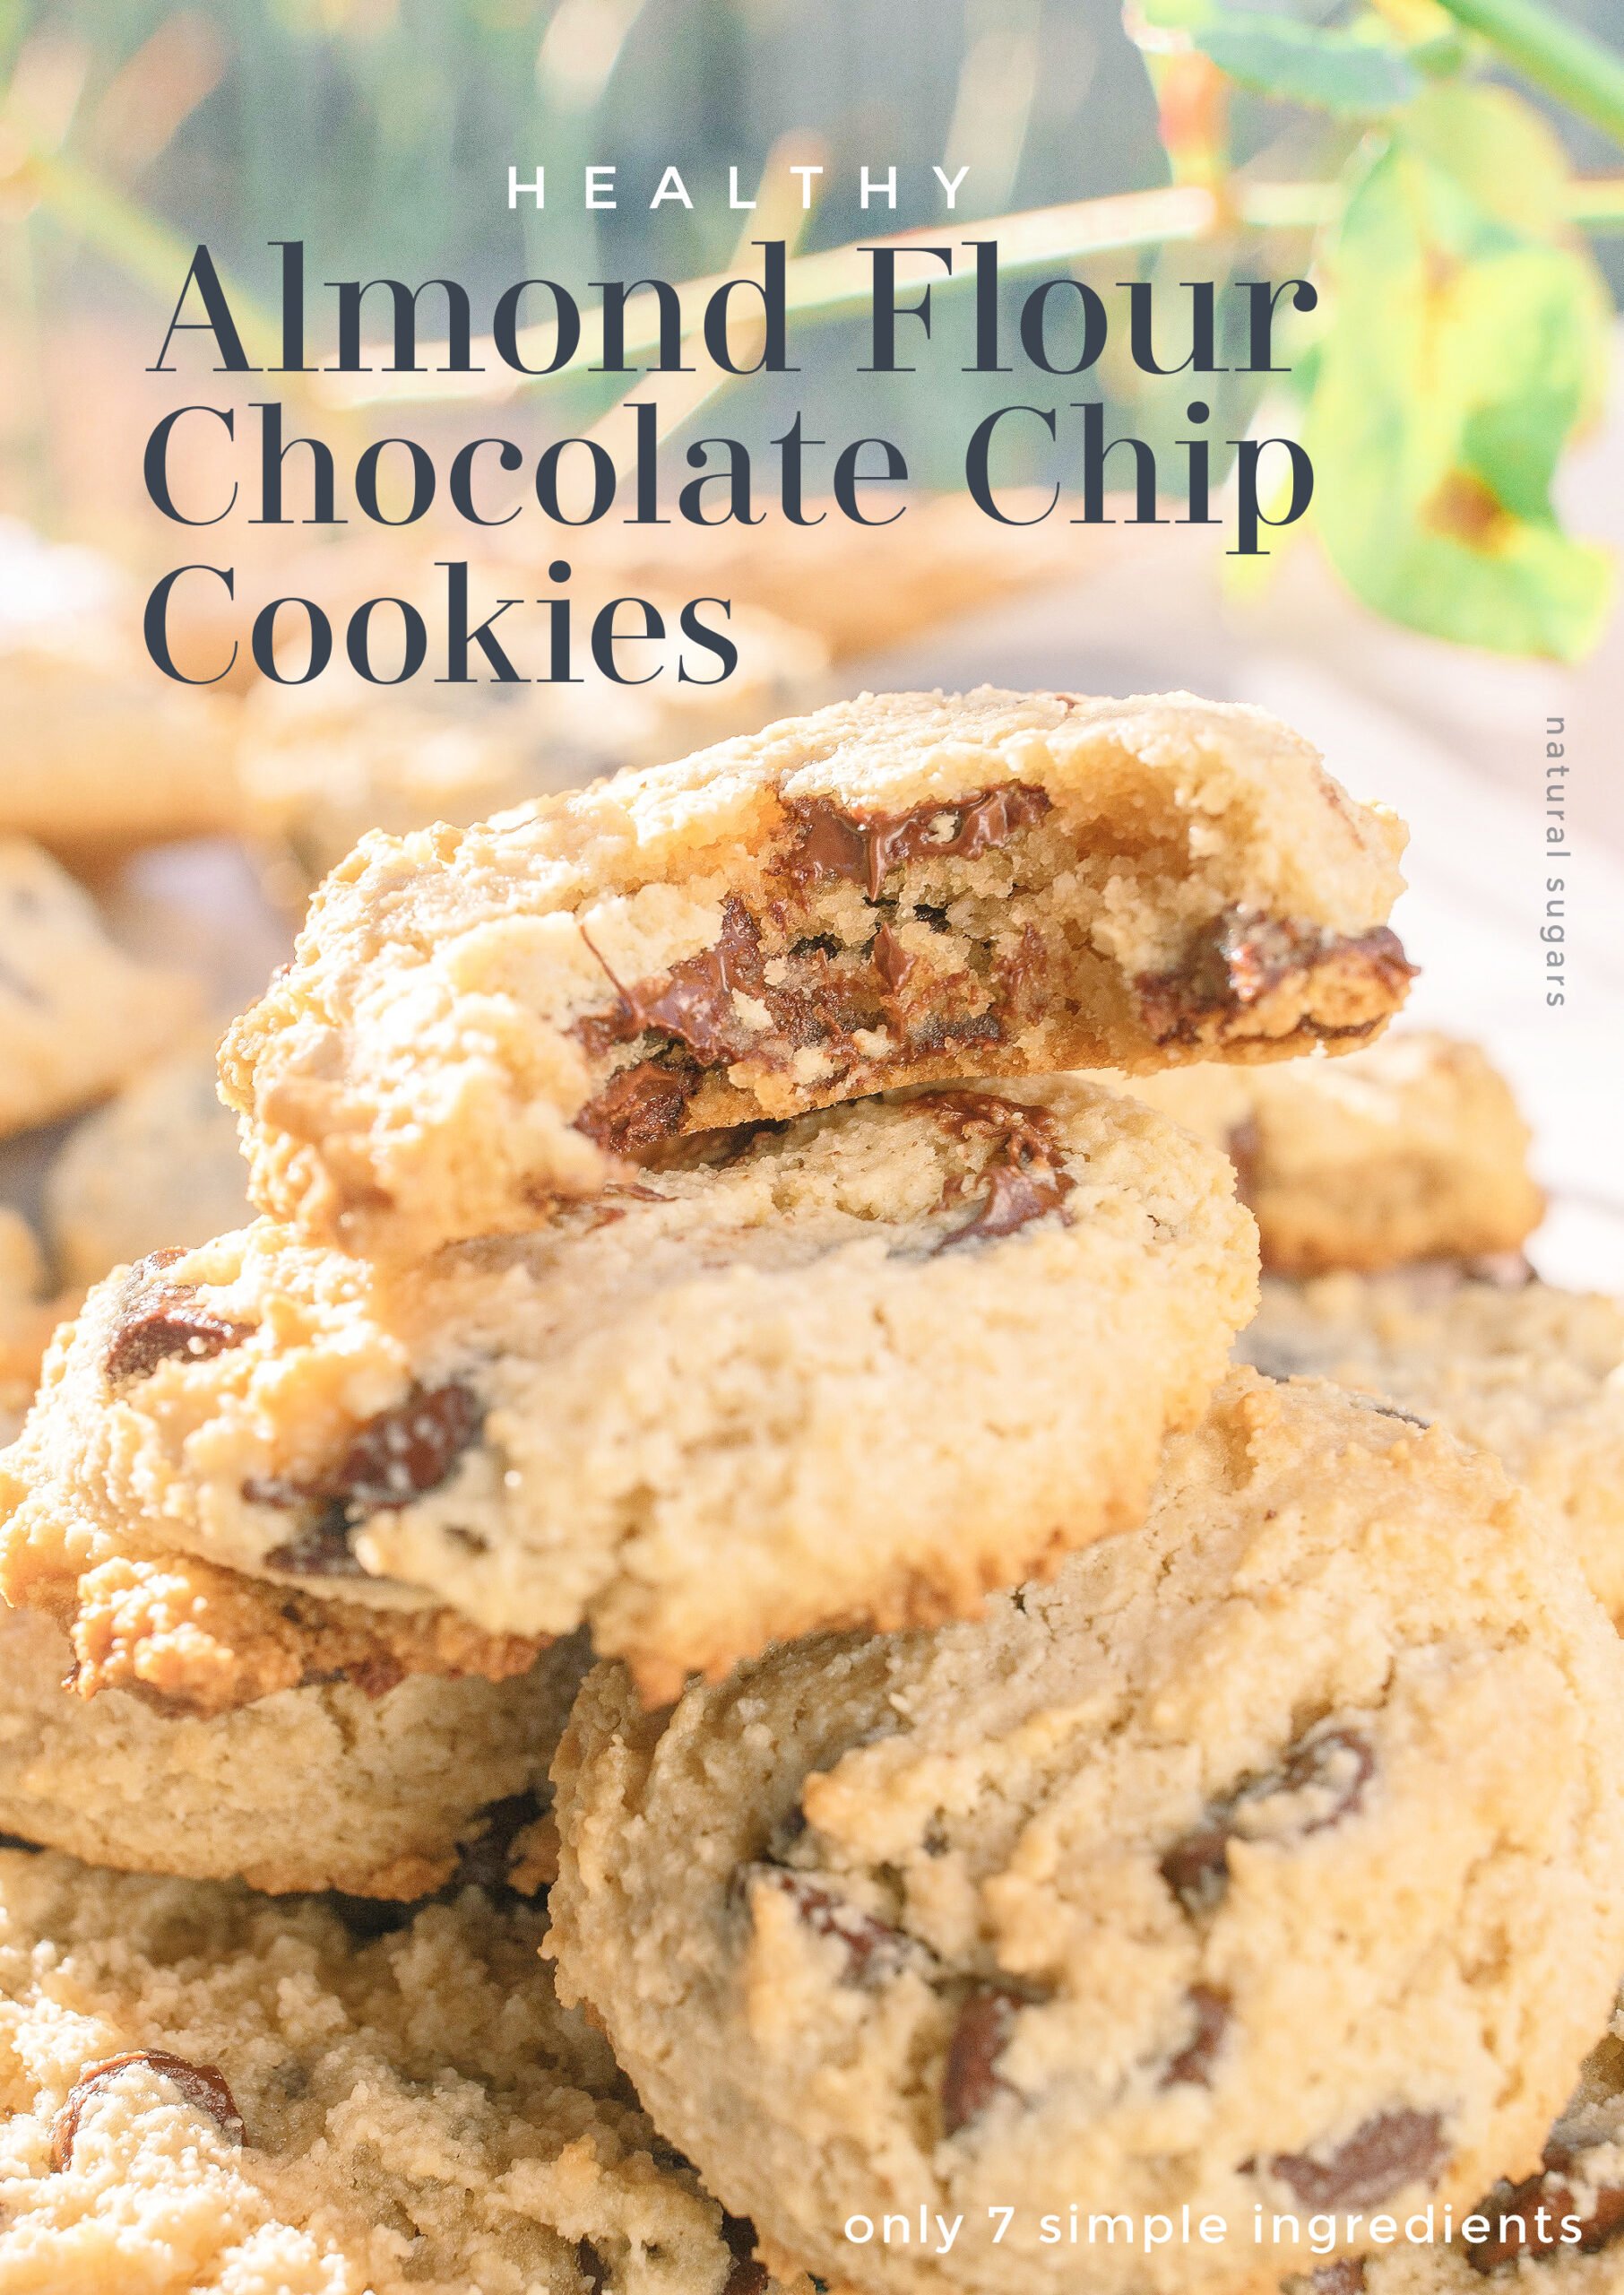 healthy chocolate chip cookies, almond flour chocolate chip cookies, low carb chocolate chip cookies, grain free chocolate chip cookies, dairy free chocolate chip cookies, paleo chocolate chip cookies, healthy cookies for kids, healthy desserts, healthy baking, almond flour recipe, low carb recipes, gluten free chocolate chip cookies, gluten free dessert, eating healthier, diet friendly desserts, homemade girl scout cookies, national weight loss month, healthy on valentines day, eat healthy Super Bowl foods, clean eating recipes 